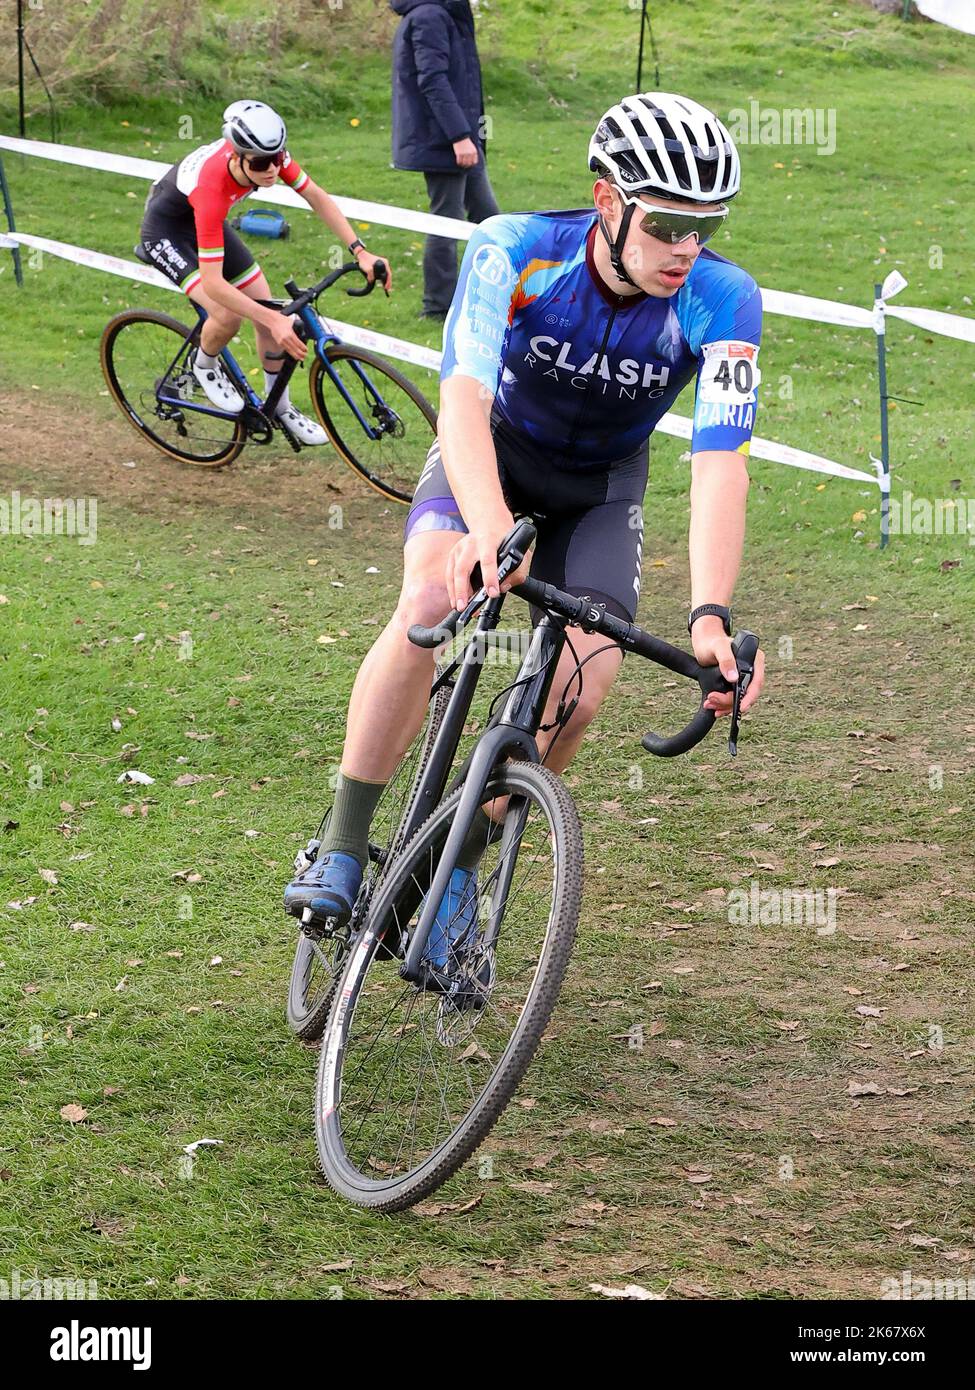 09.10.2022   Derby, England. Cyclocross.                   Finn Mansfield (Clash Racing) in action during the British Cycling Men’s Cyclocross Nation Championship round 2 (Derby) held at the Moorways Sports Village, Derby.  © Phil Hutchinson Stock Photo